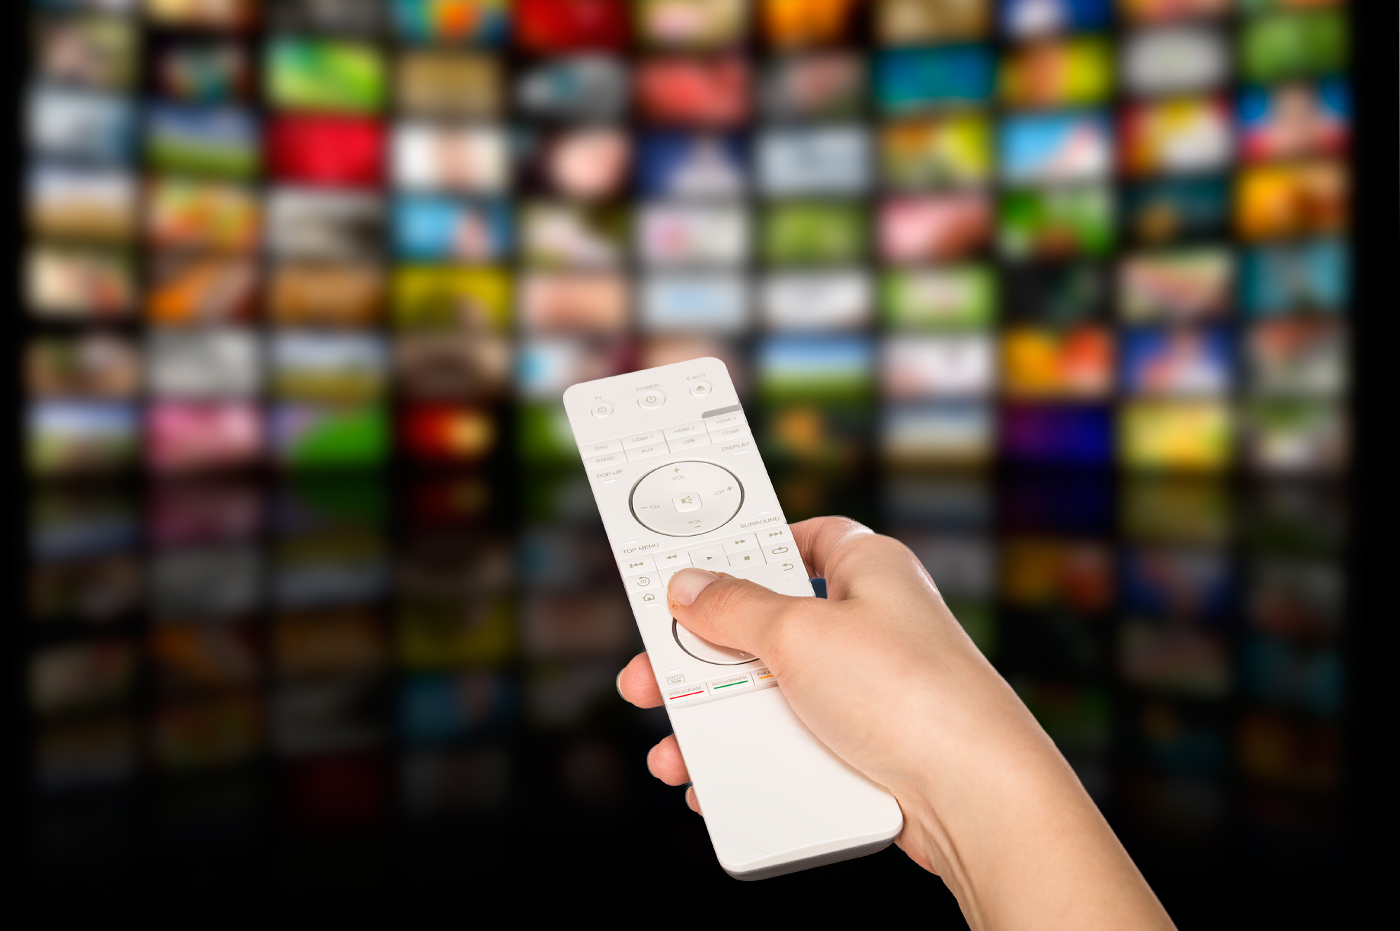 A remote pointed at a large screen with multiple options of shows and movies.